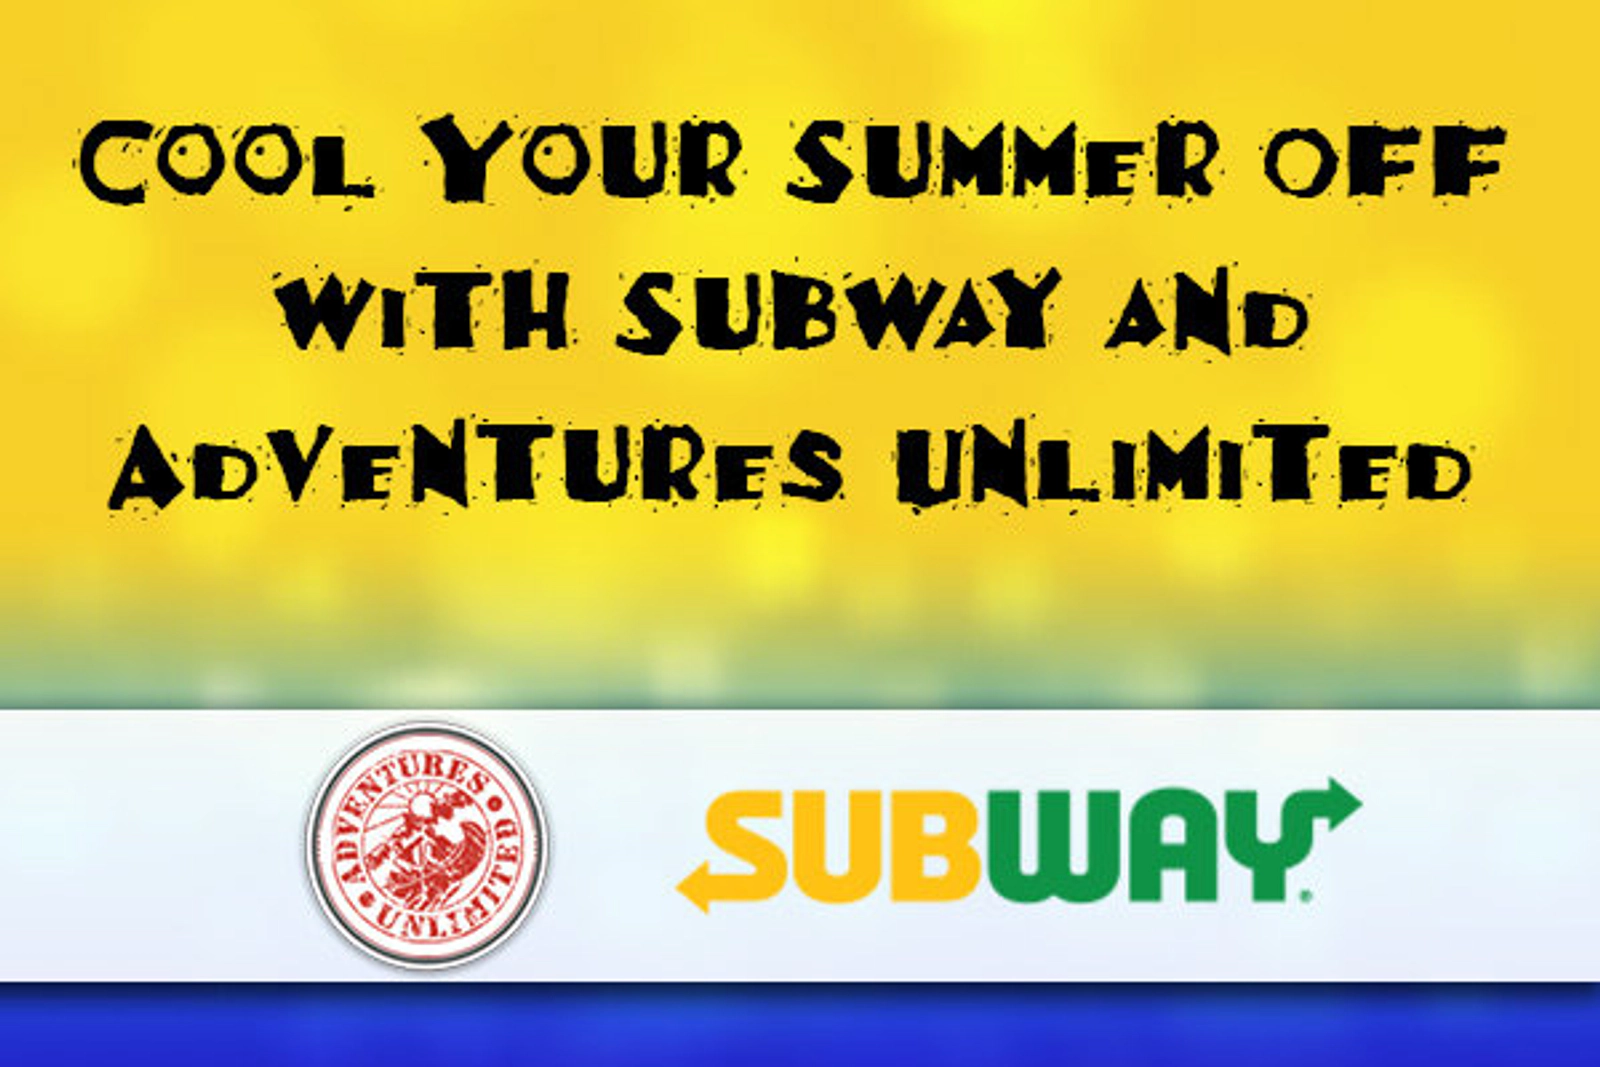     Cool Off Your Summer With Adventures Unlimited and Subway!   - Thumbnail Image